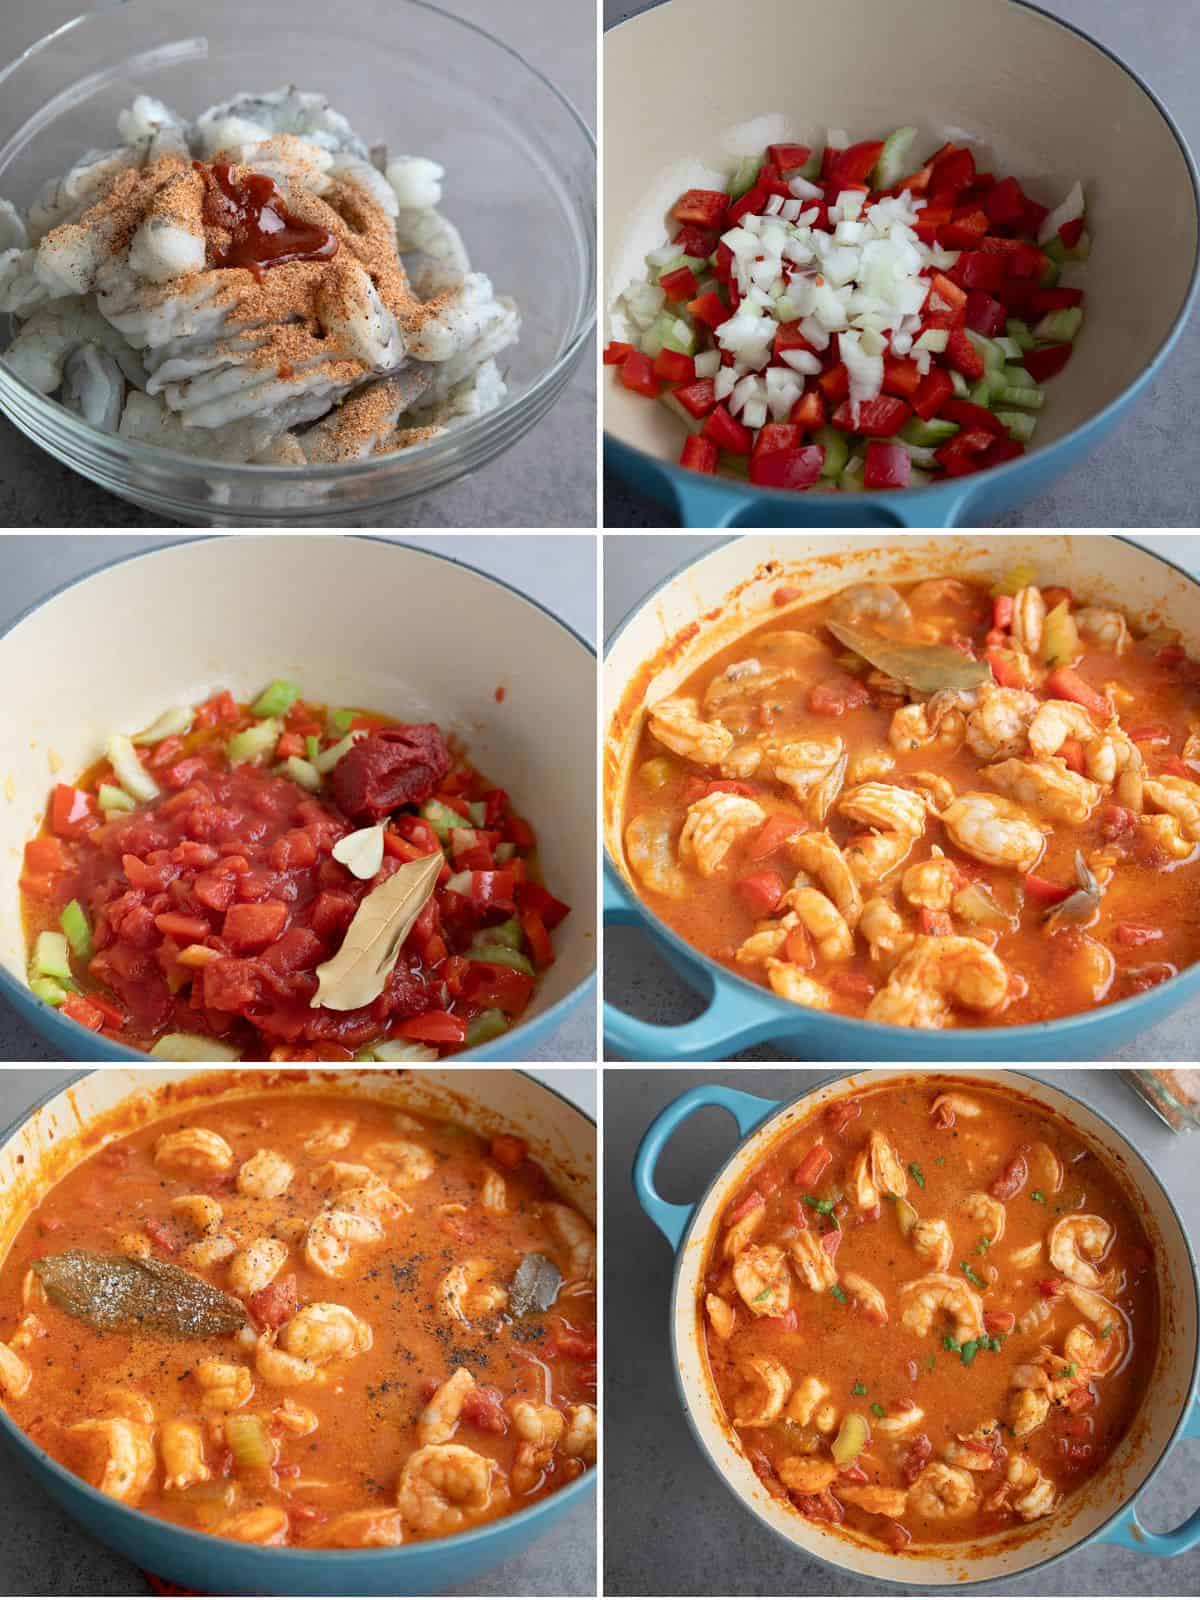 A collage of 6 image showing how to make Shrimp Creole.